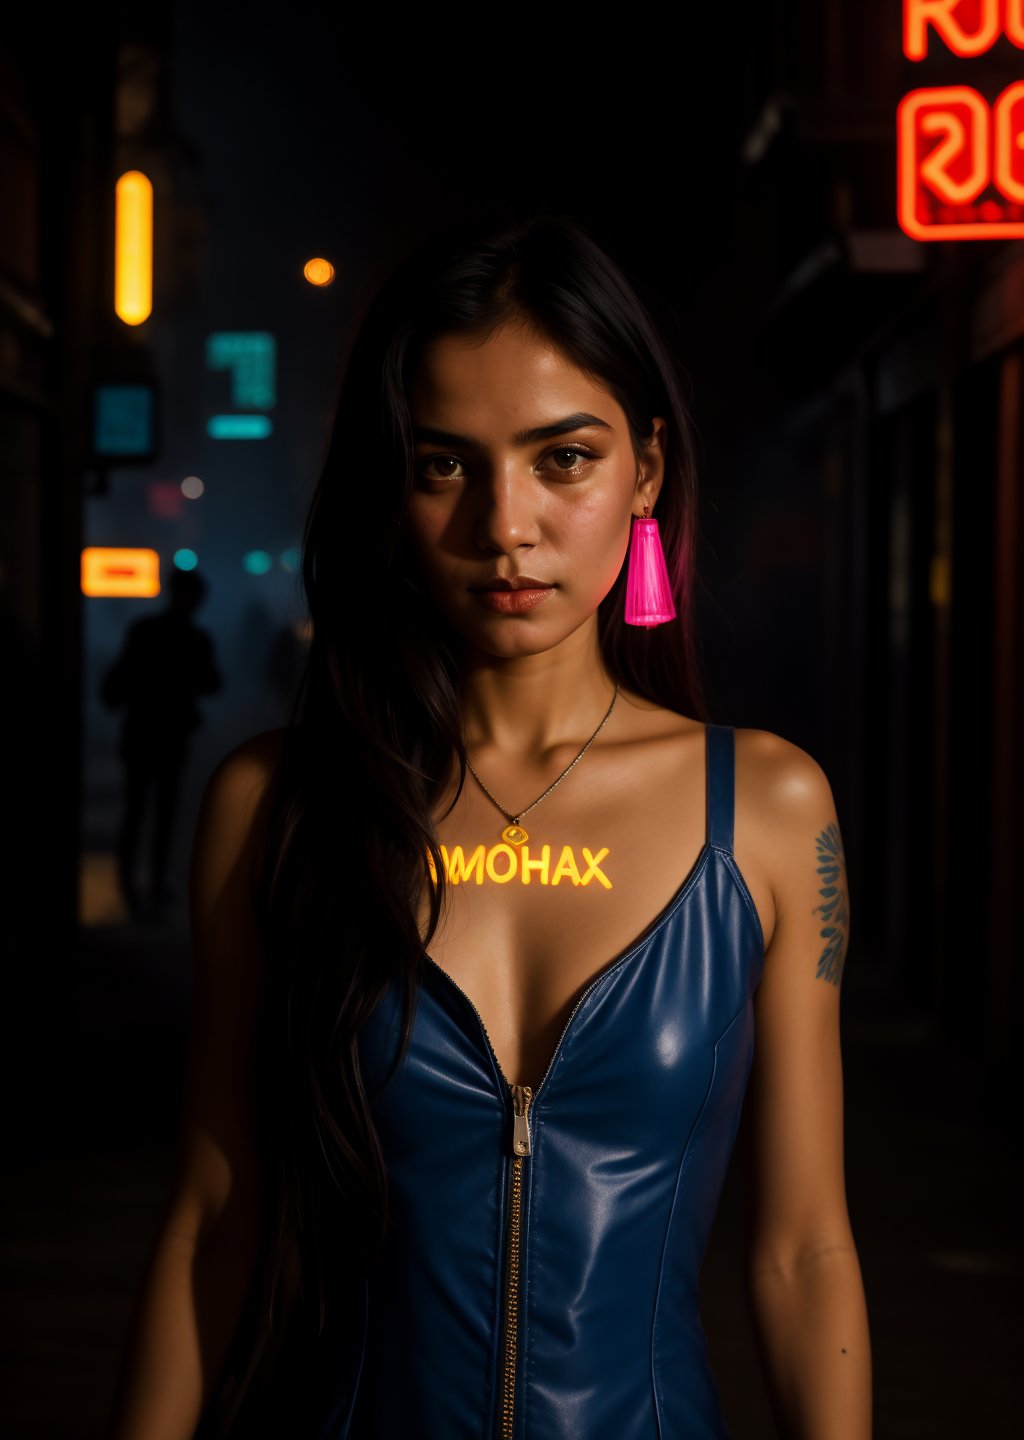 android afghan girl photography by Steve McCurry in cyberpunk style,cyberpunk urban scenery,150mm,dlrs,robotic parts,beautiful neon soft light,bioluminescent tattoos,vibrant details,explicit soft mist,beautiful masterwork by head of prompt engineering